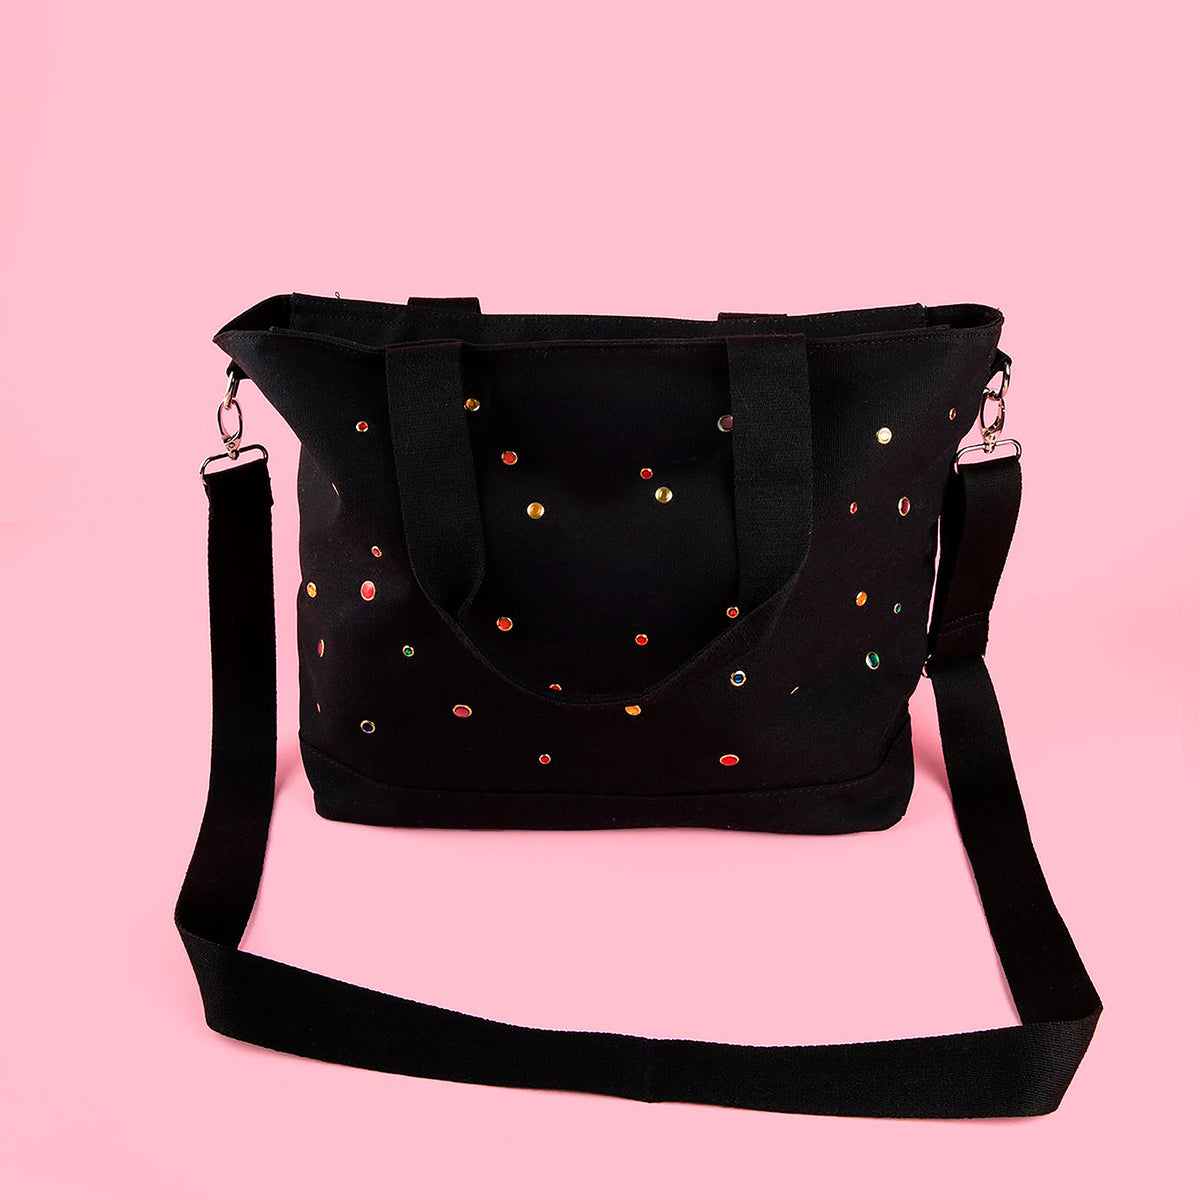 Black and Rainbow Metallic Strap Fanny Pack - Daily Disco